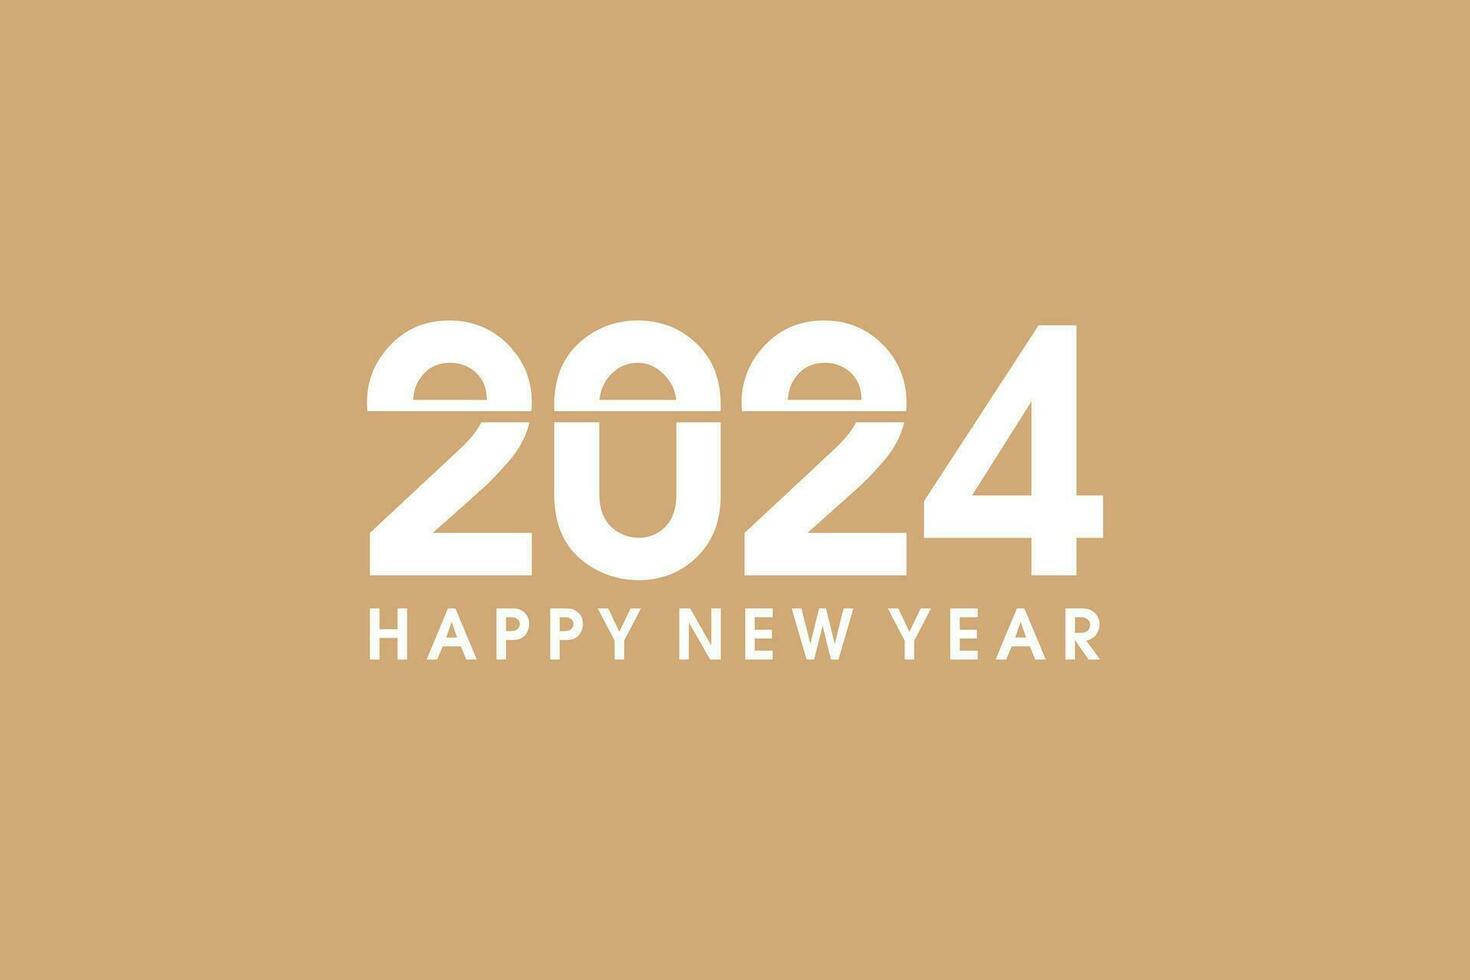 happy new year 2024 vector, simple 2024 design background in white color vector